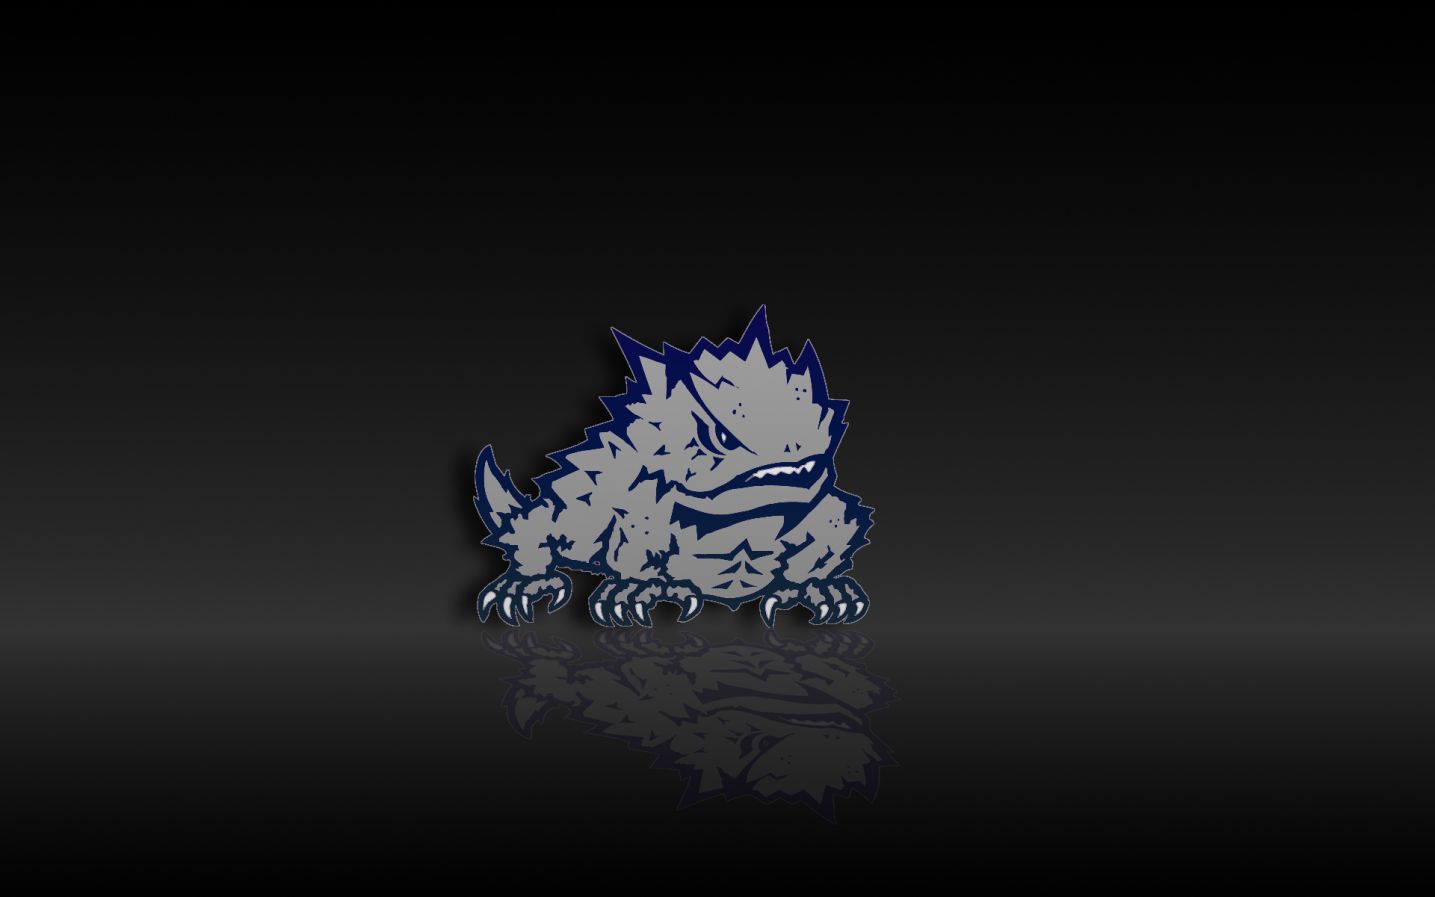 Tcu Wallpaper Chrome Browser Themes Amp More For Horned